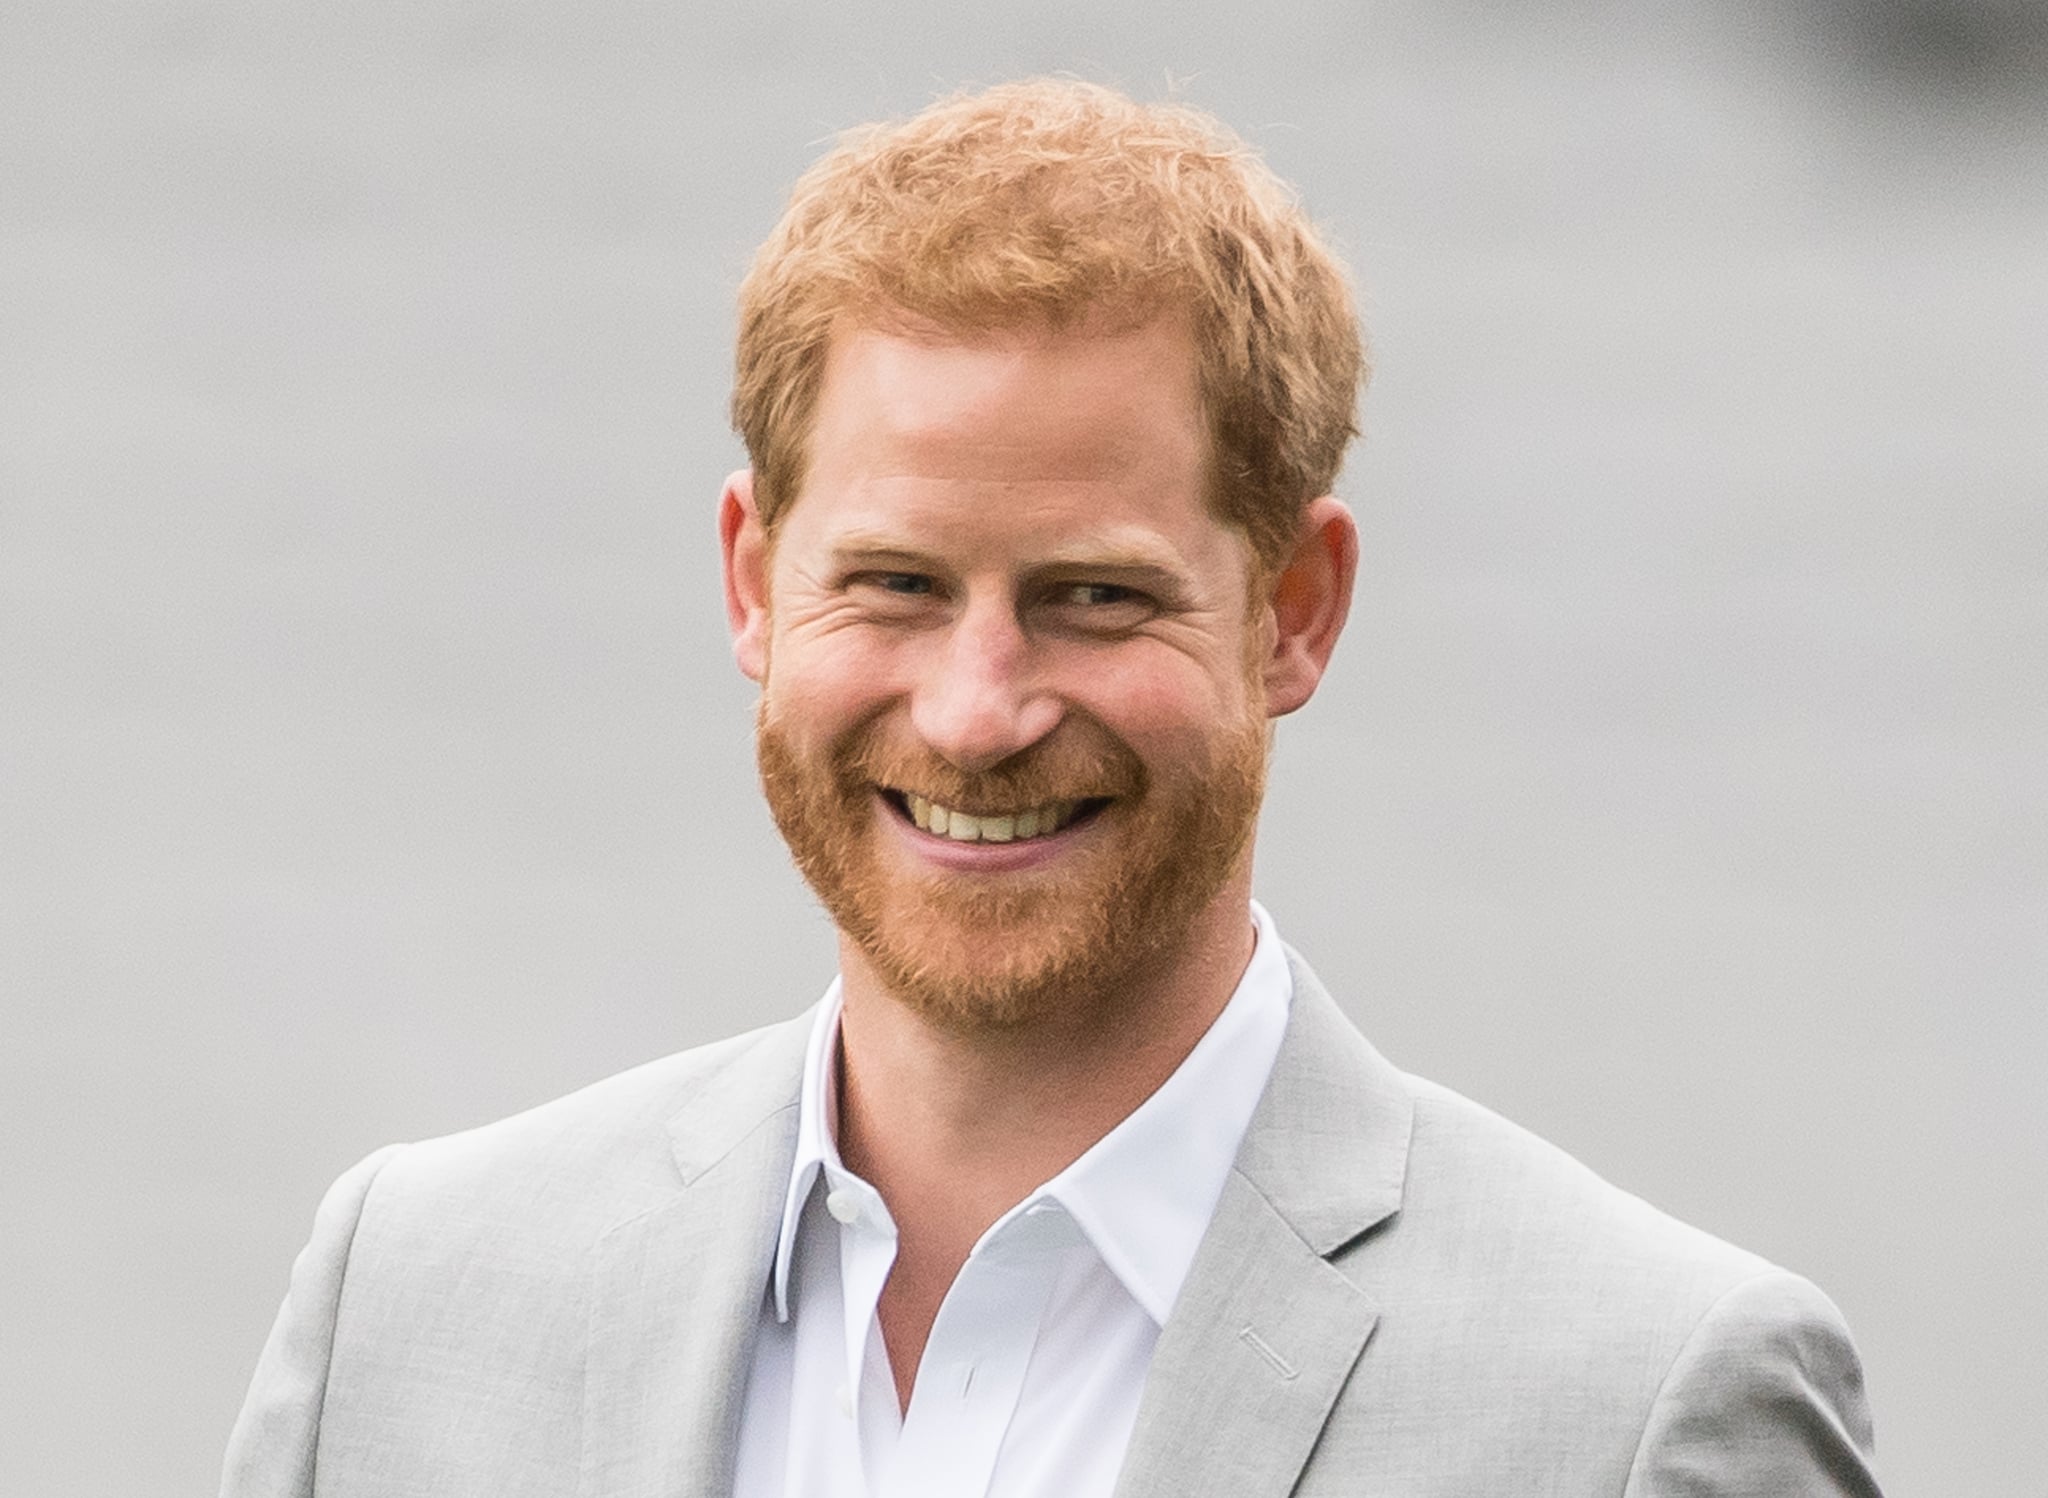 DUBLIN, IRELAND - JULY 11:  Prince Harry, Duke of Sussex visits Croke Park, home of Ireland's largest sporting organisation, the Gaelic Athletic Association on July 11, 2018 in Dublin, Ireland.  (Photo by Samir Hussein/Samir Hussein/WireImage)